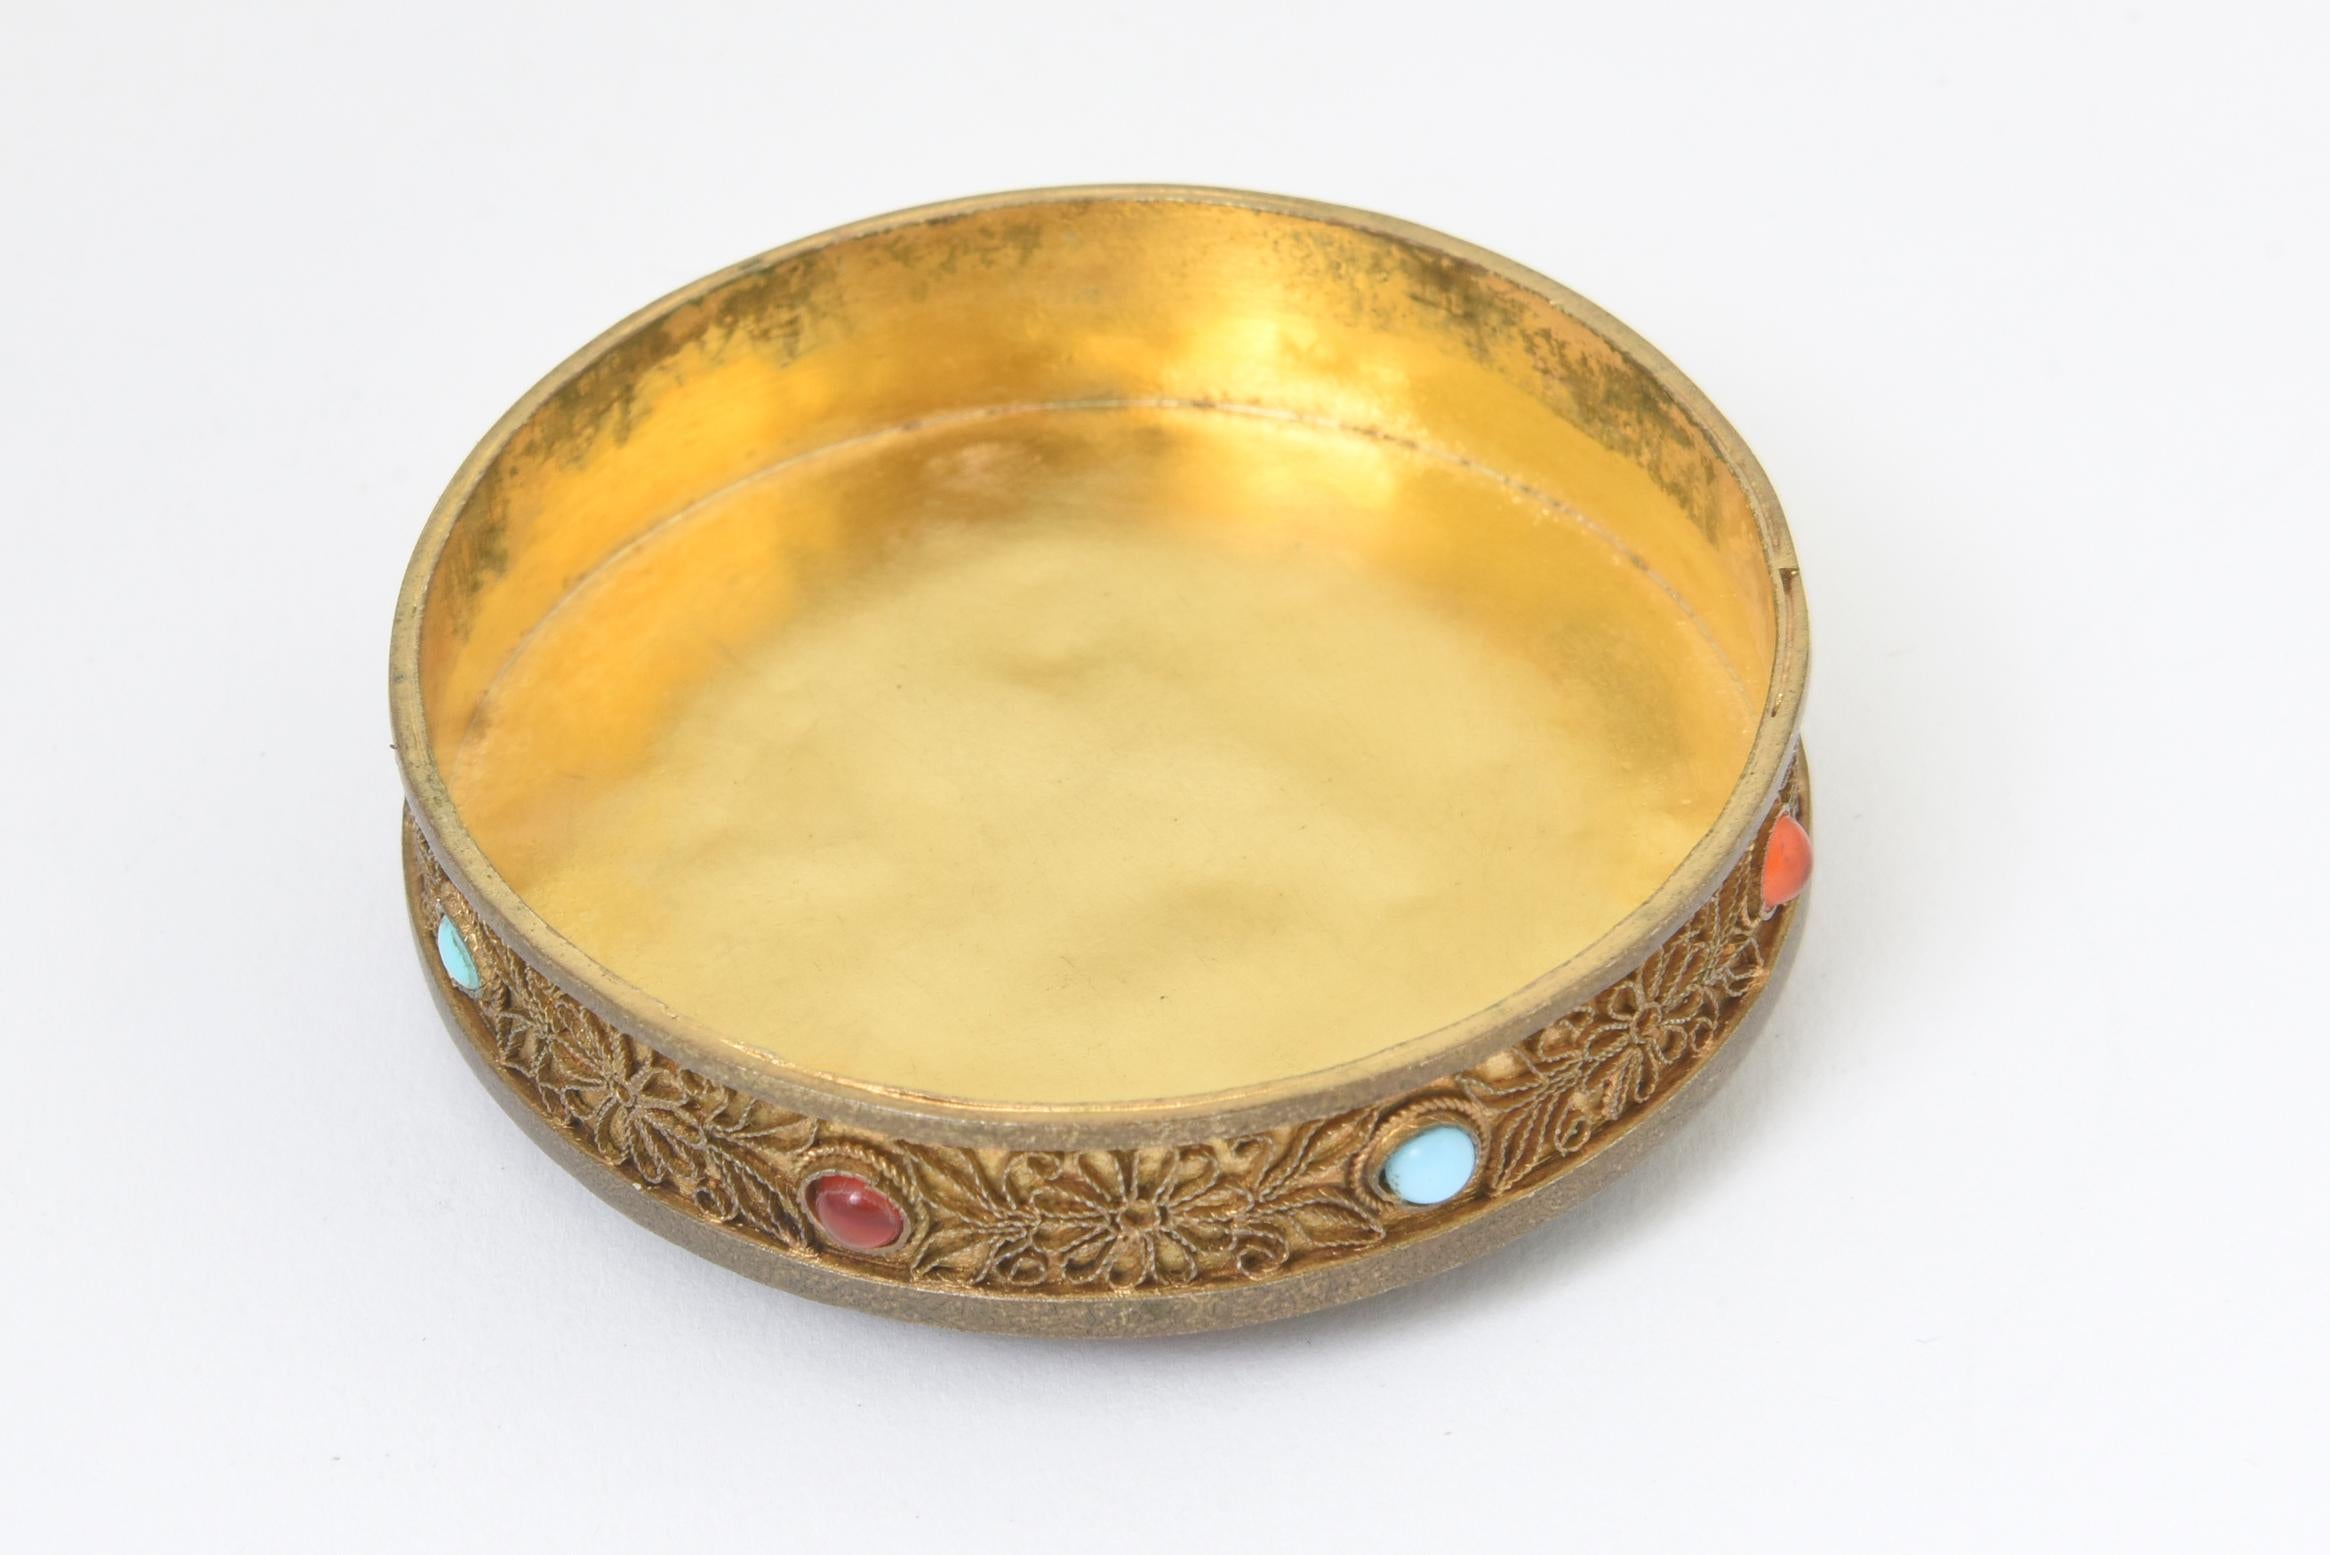 Early 20th Century Antique Asian Jeweled Gilt-Brass Trinket Box For Sale 1